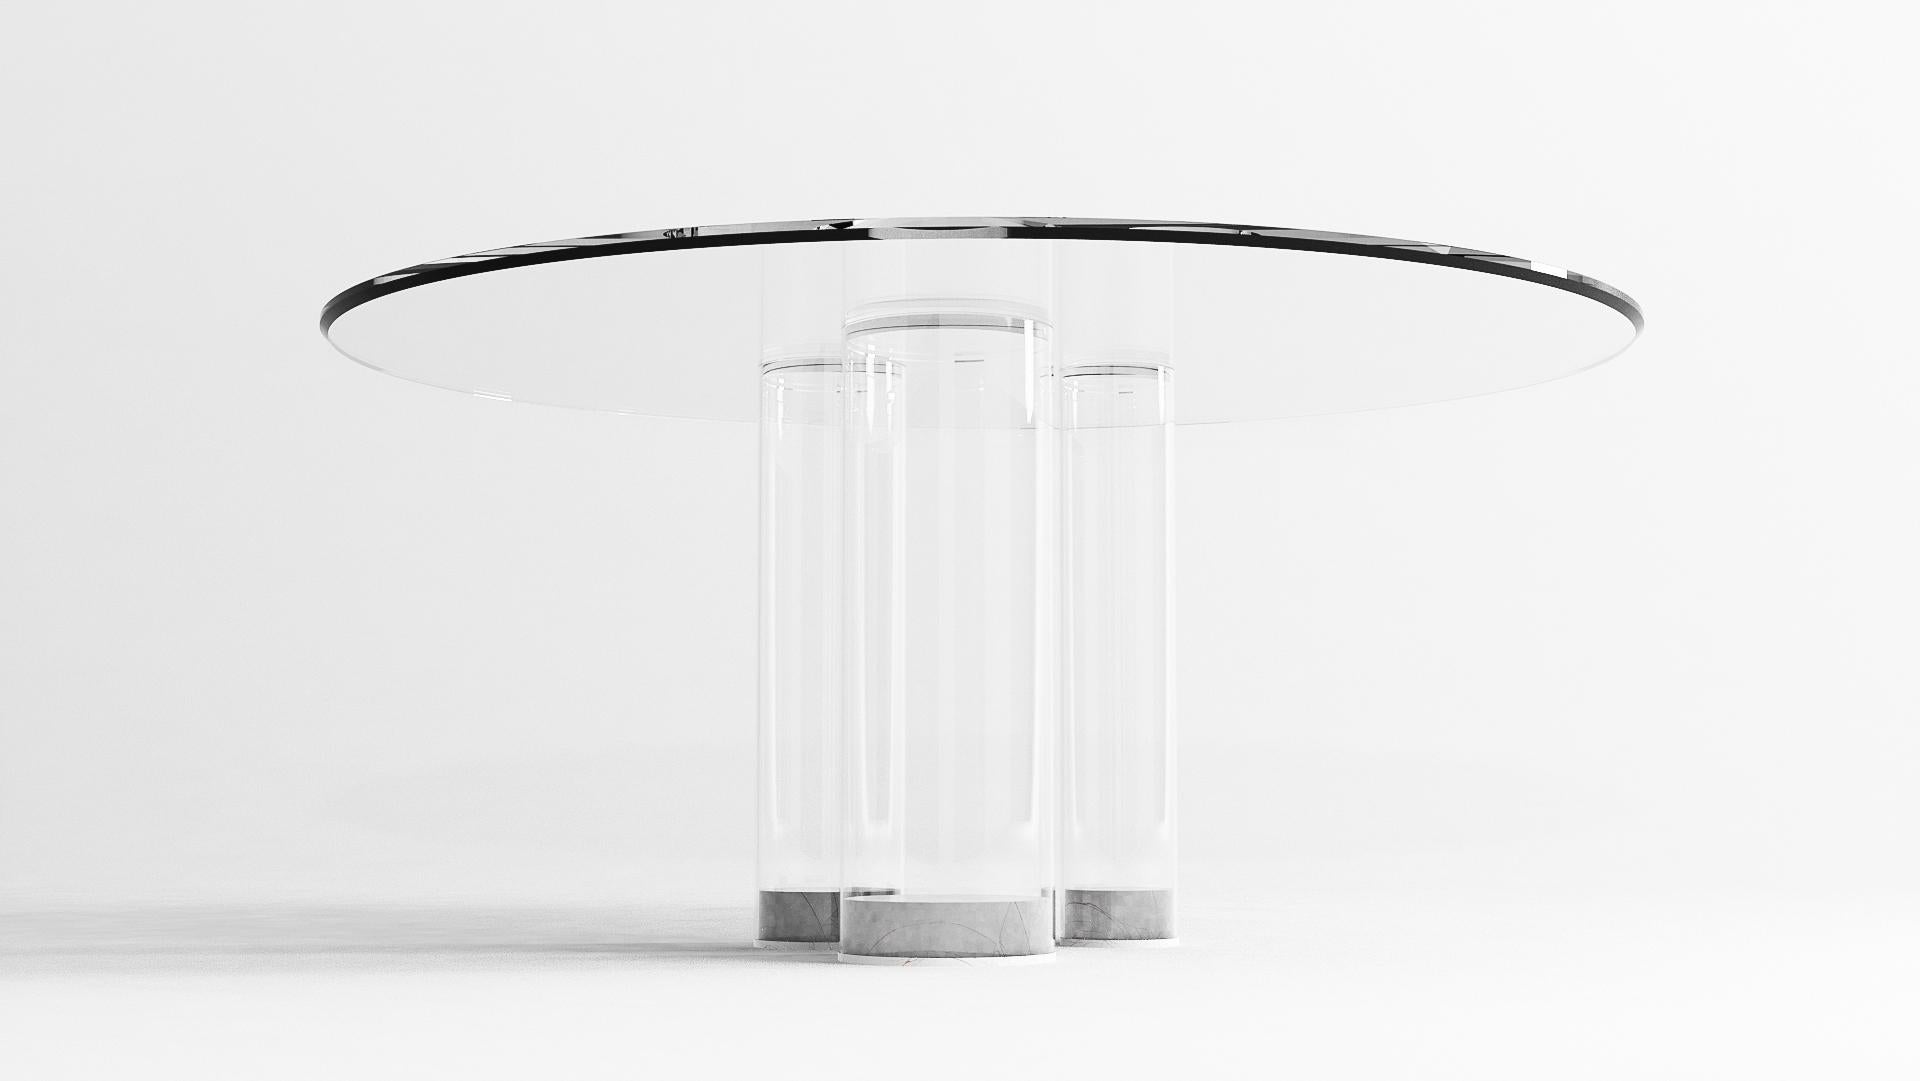 Tubular is the ultimate decorative table. Its presence in the room is subtle. It enhances the other objects in the room and at the same time offers beauty to whomever can catch its eye. The top and legs are made entirely of glass, but tubular can be